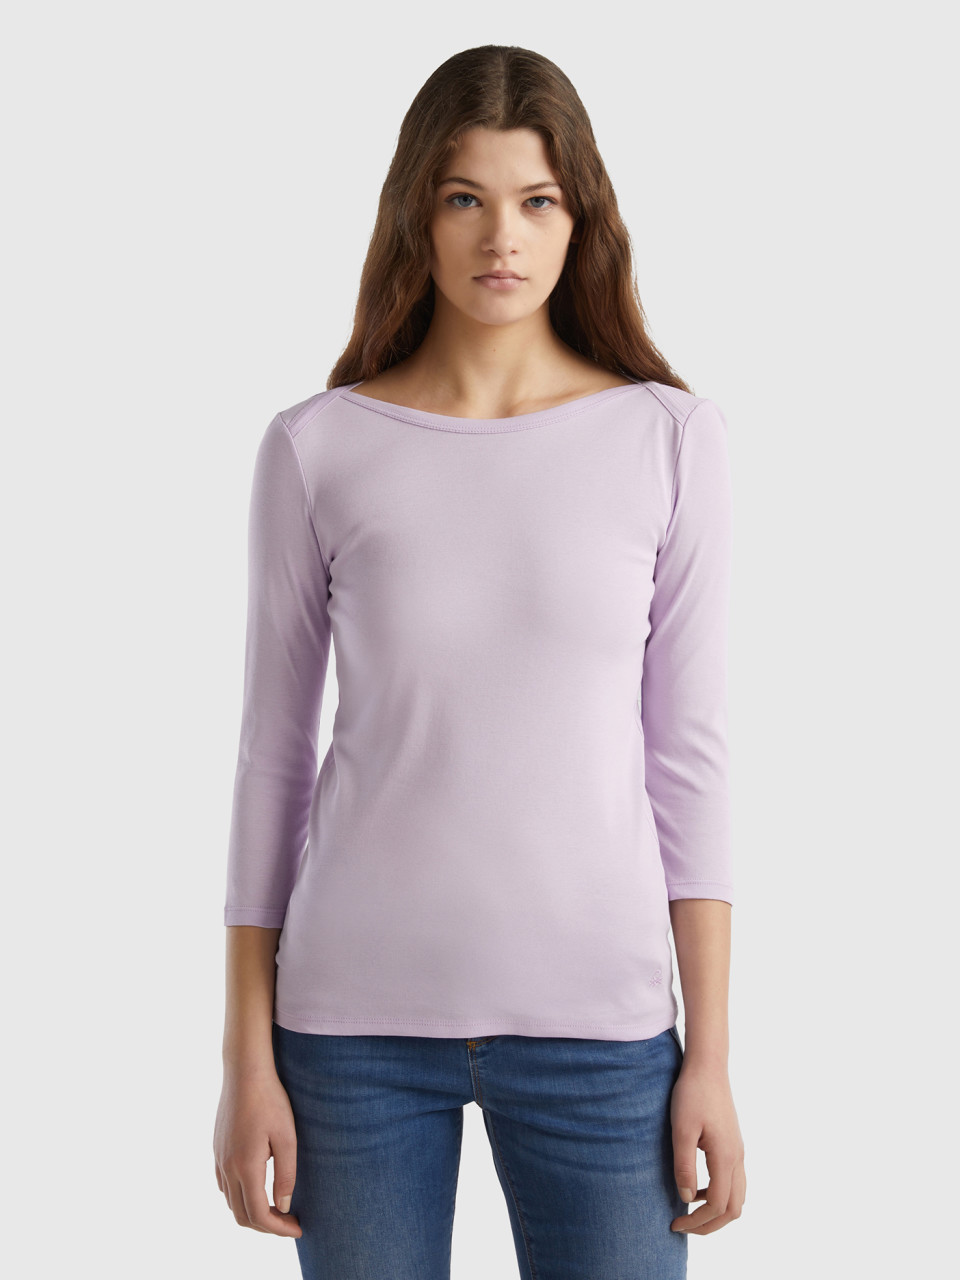 Benetton, T-shirt With Boat Neck In 100% Cotton, Lilac, Women